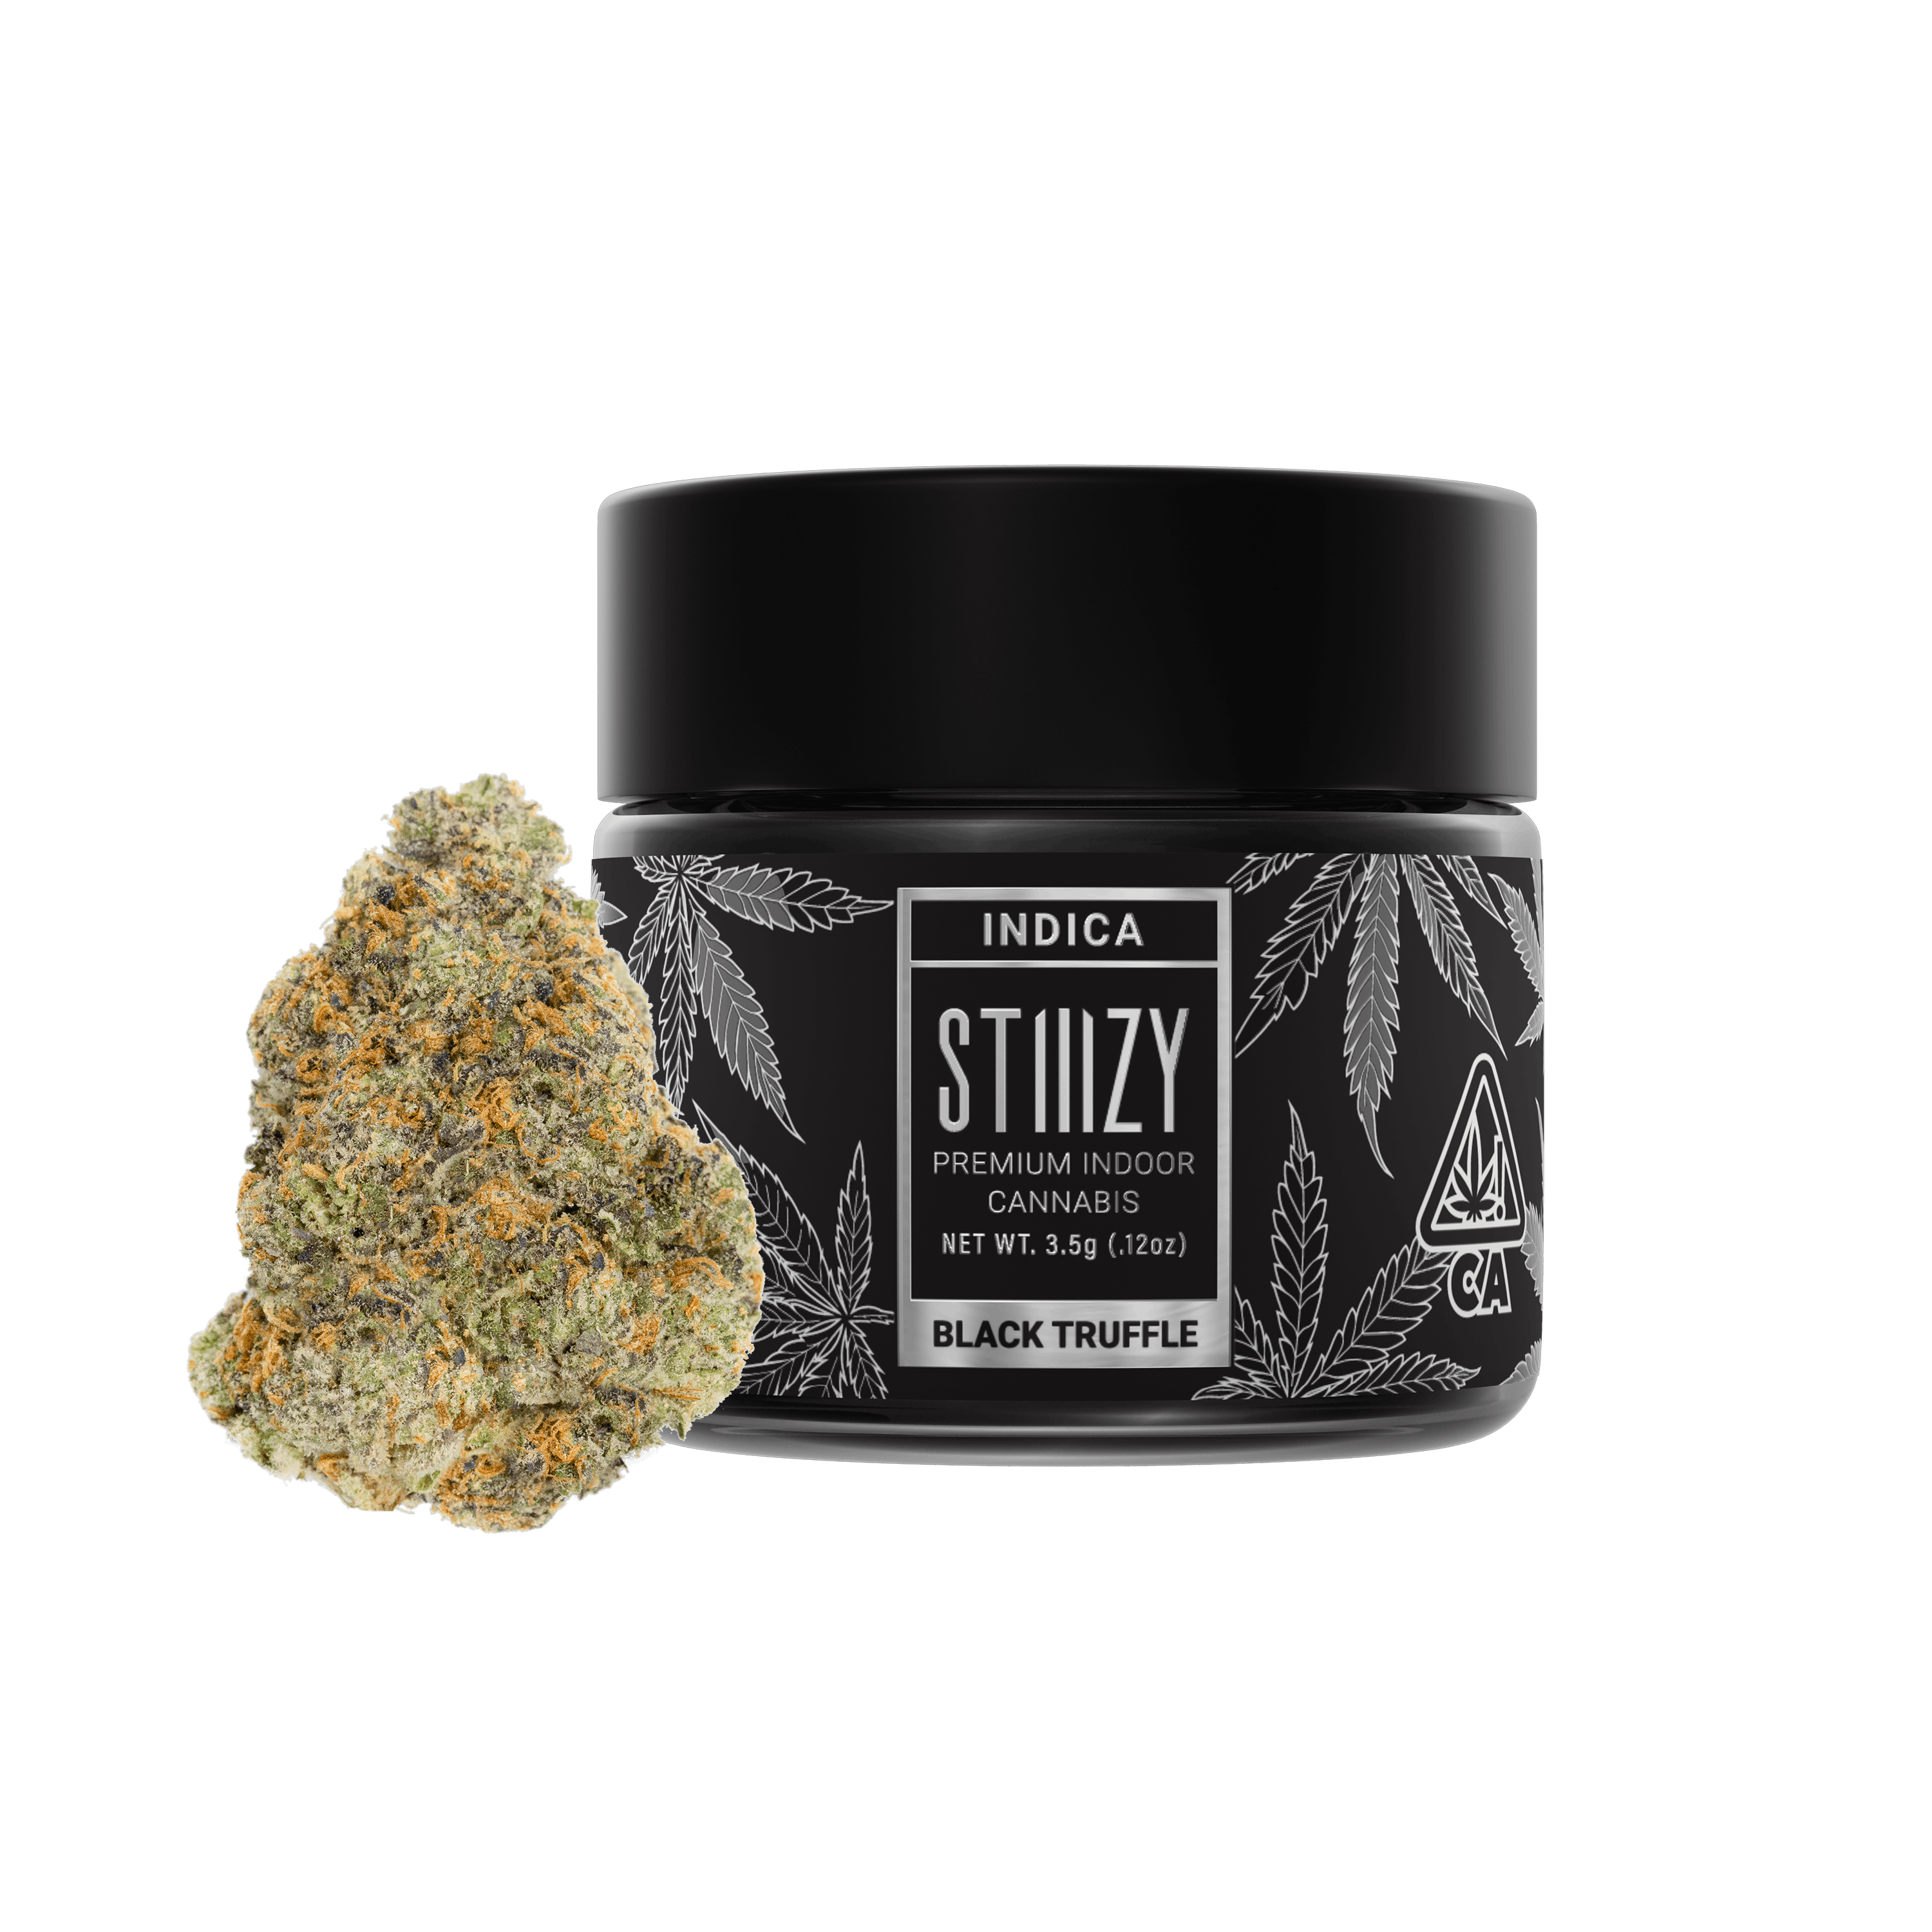 A nug of cannabis flower from the Black Truffle strain stands next to its black jar.